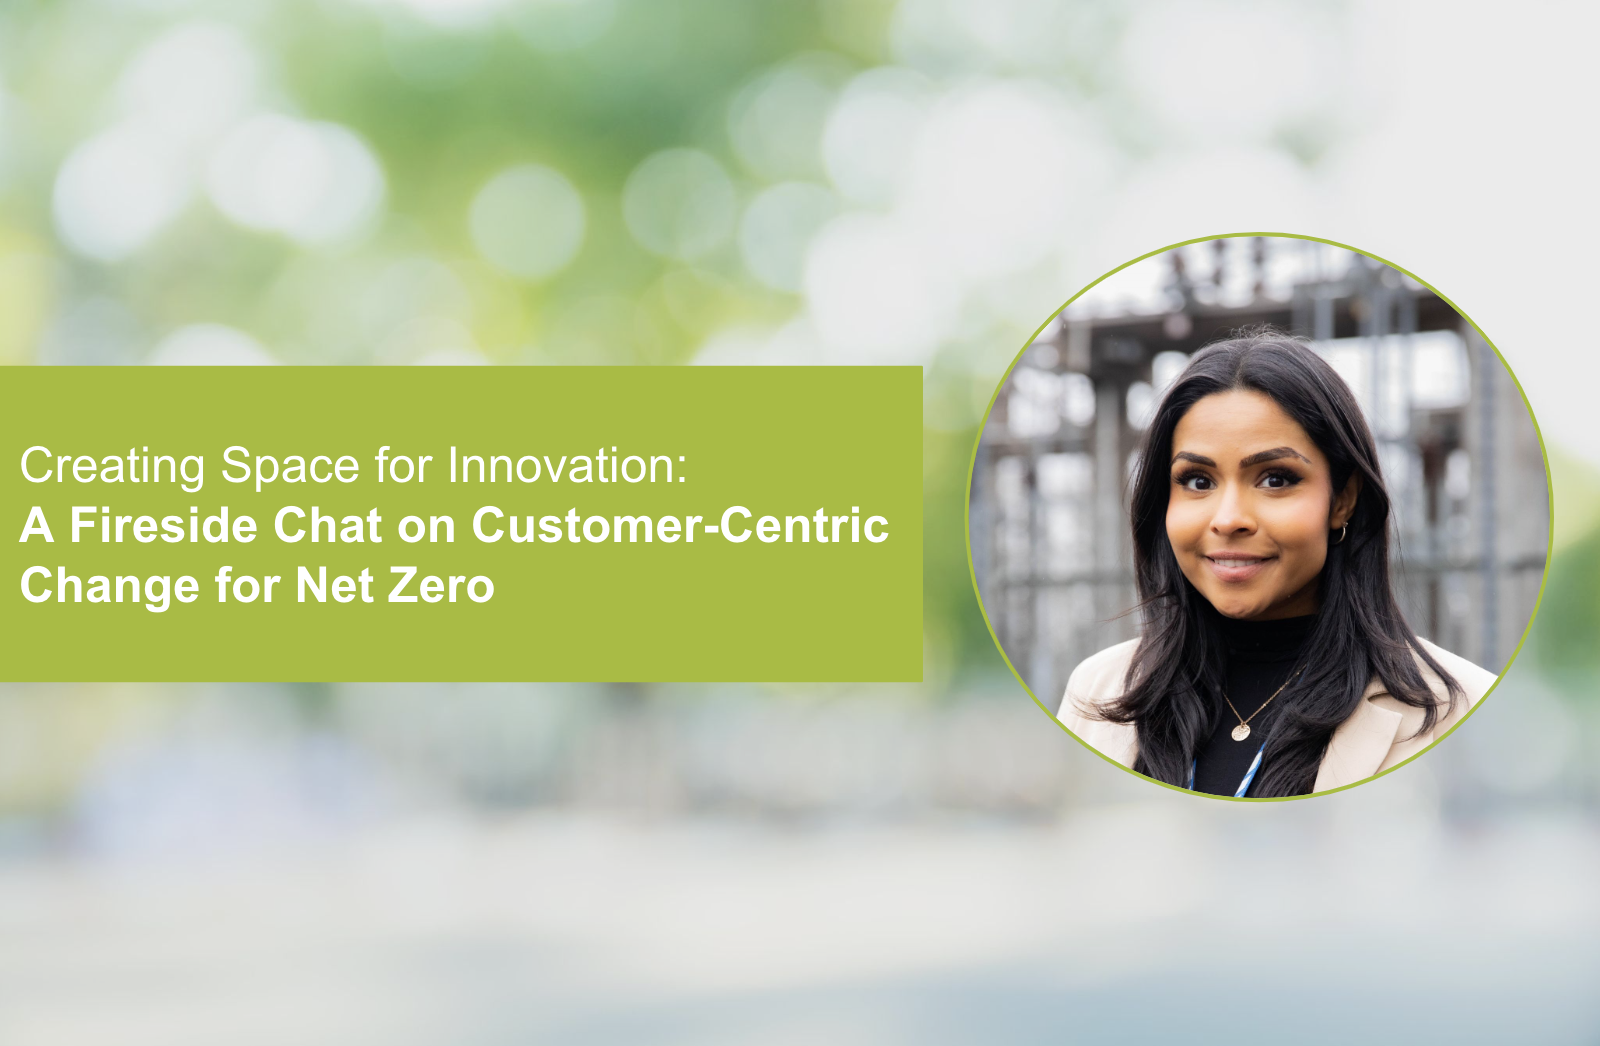 Creating Space for Innovation: A Fireside Chat on Customer-Centric Change for Net Zero